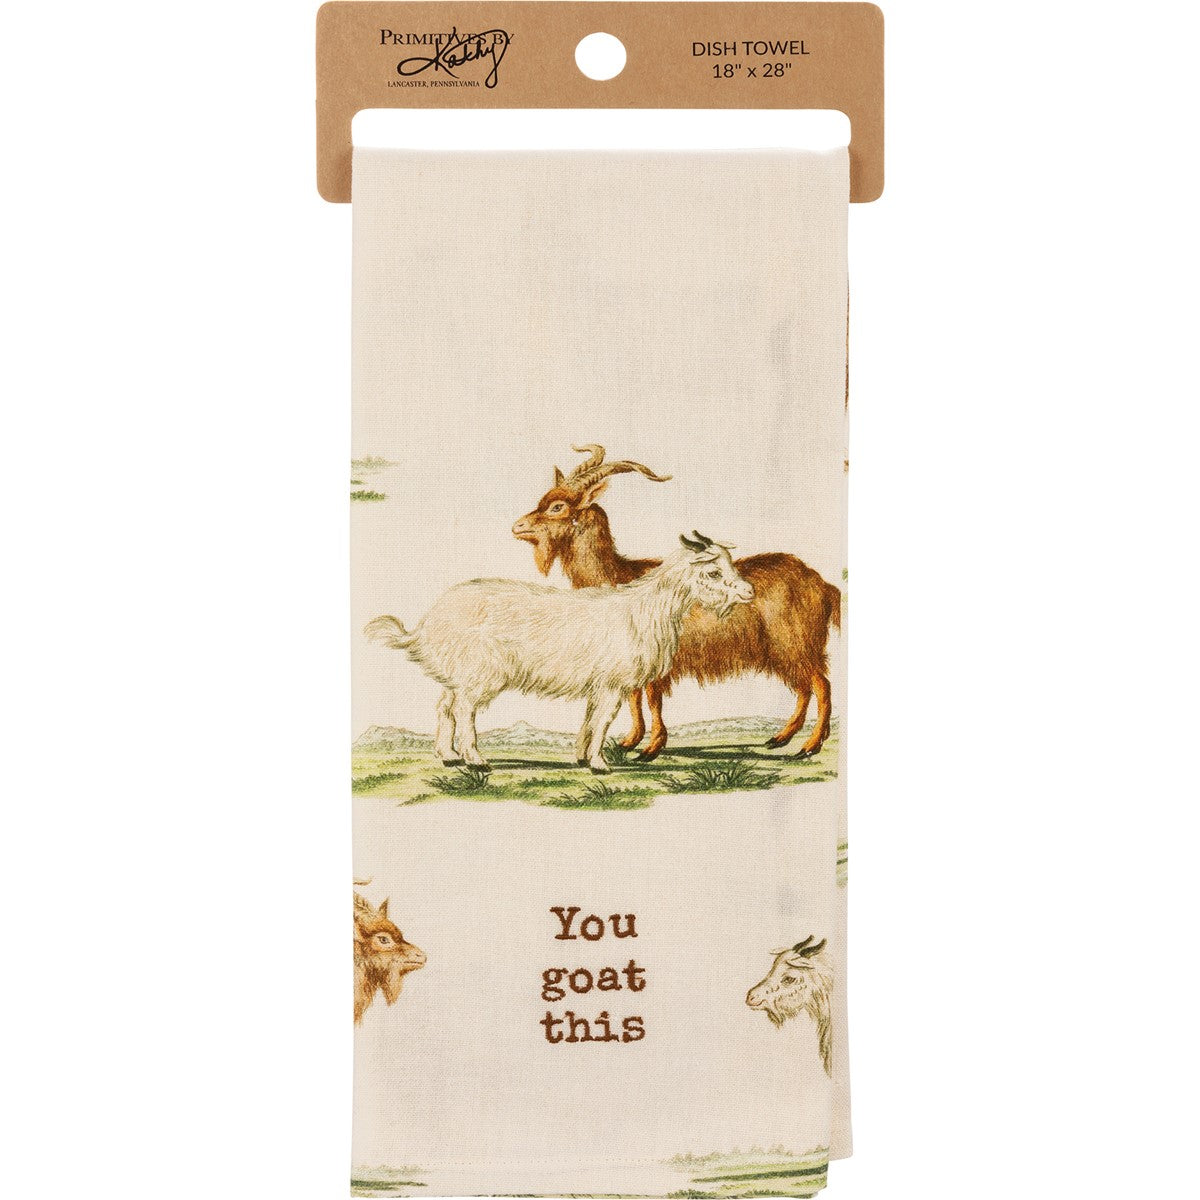 off-white towel with goat design and "you goat this" embroidered on it.